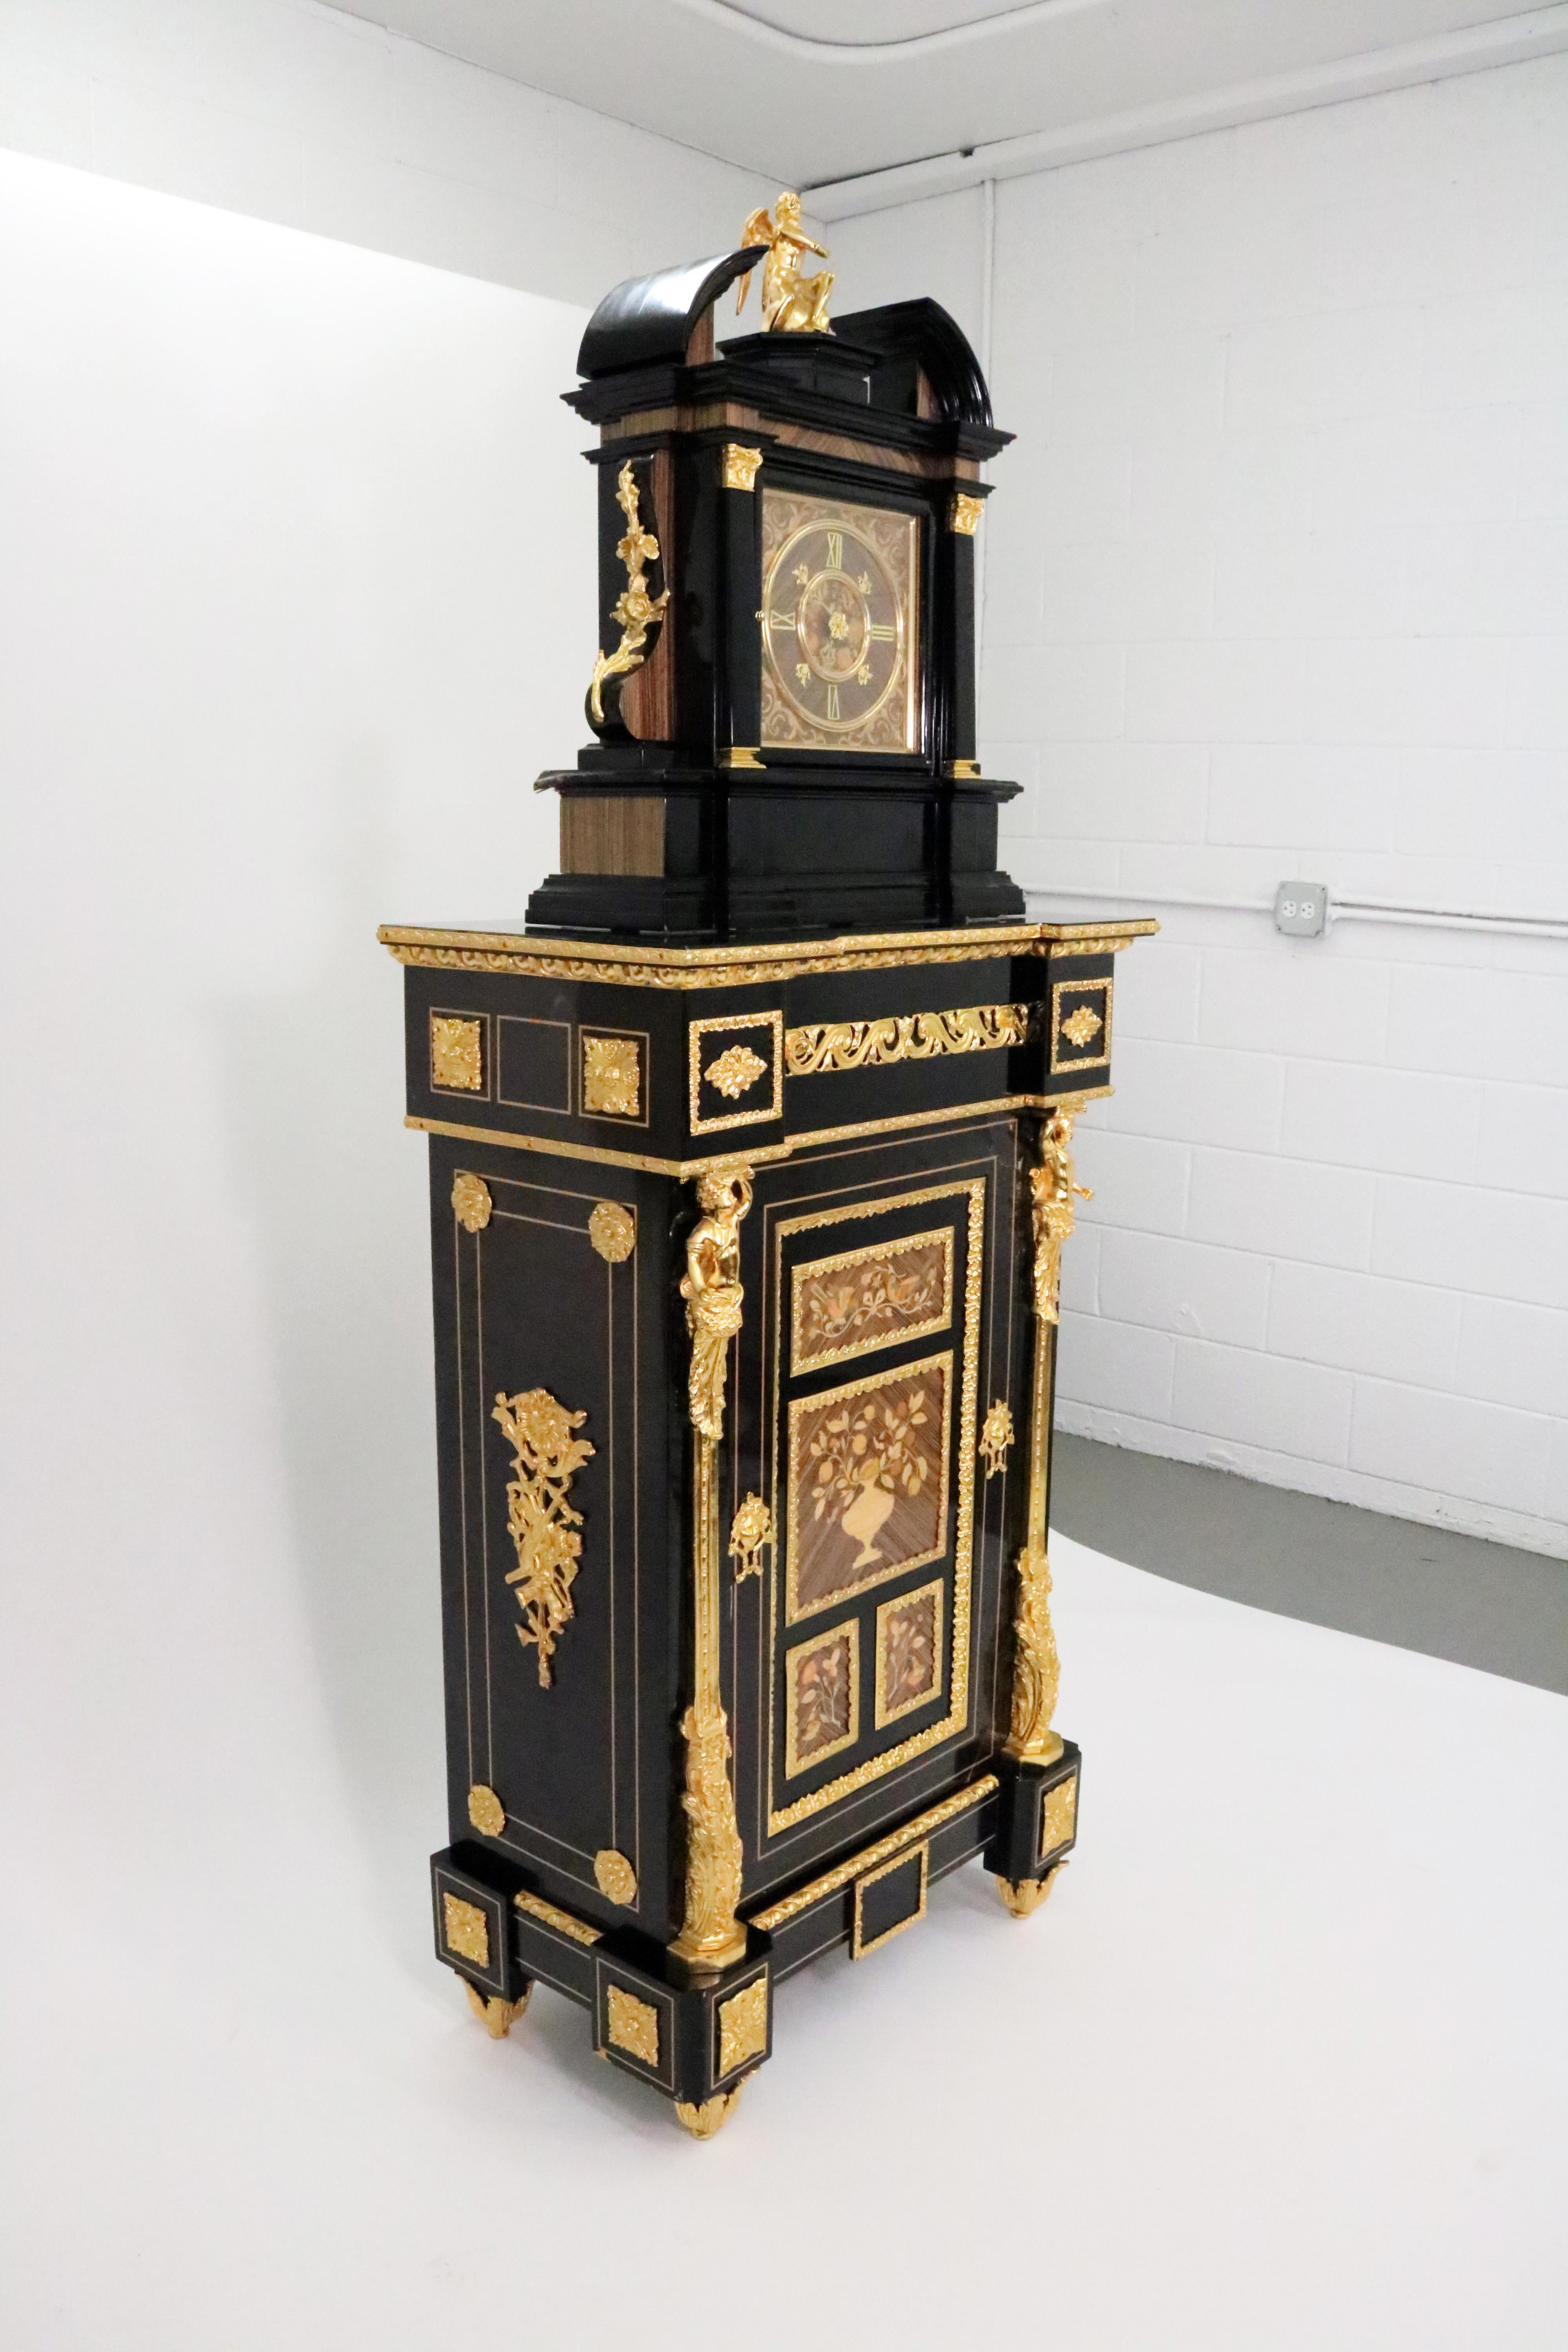 A grand longcase clock produced in Italy in the 1970s in a rococo Louis XV style with dore bronze ormolu mountings and wood inlay decorating a black-lacquered wood case.

The German-made clock’s two-barrel spring movement is a Hermle calibre